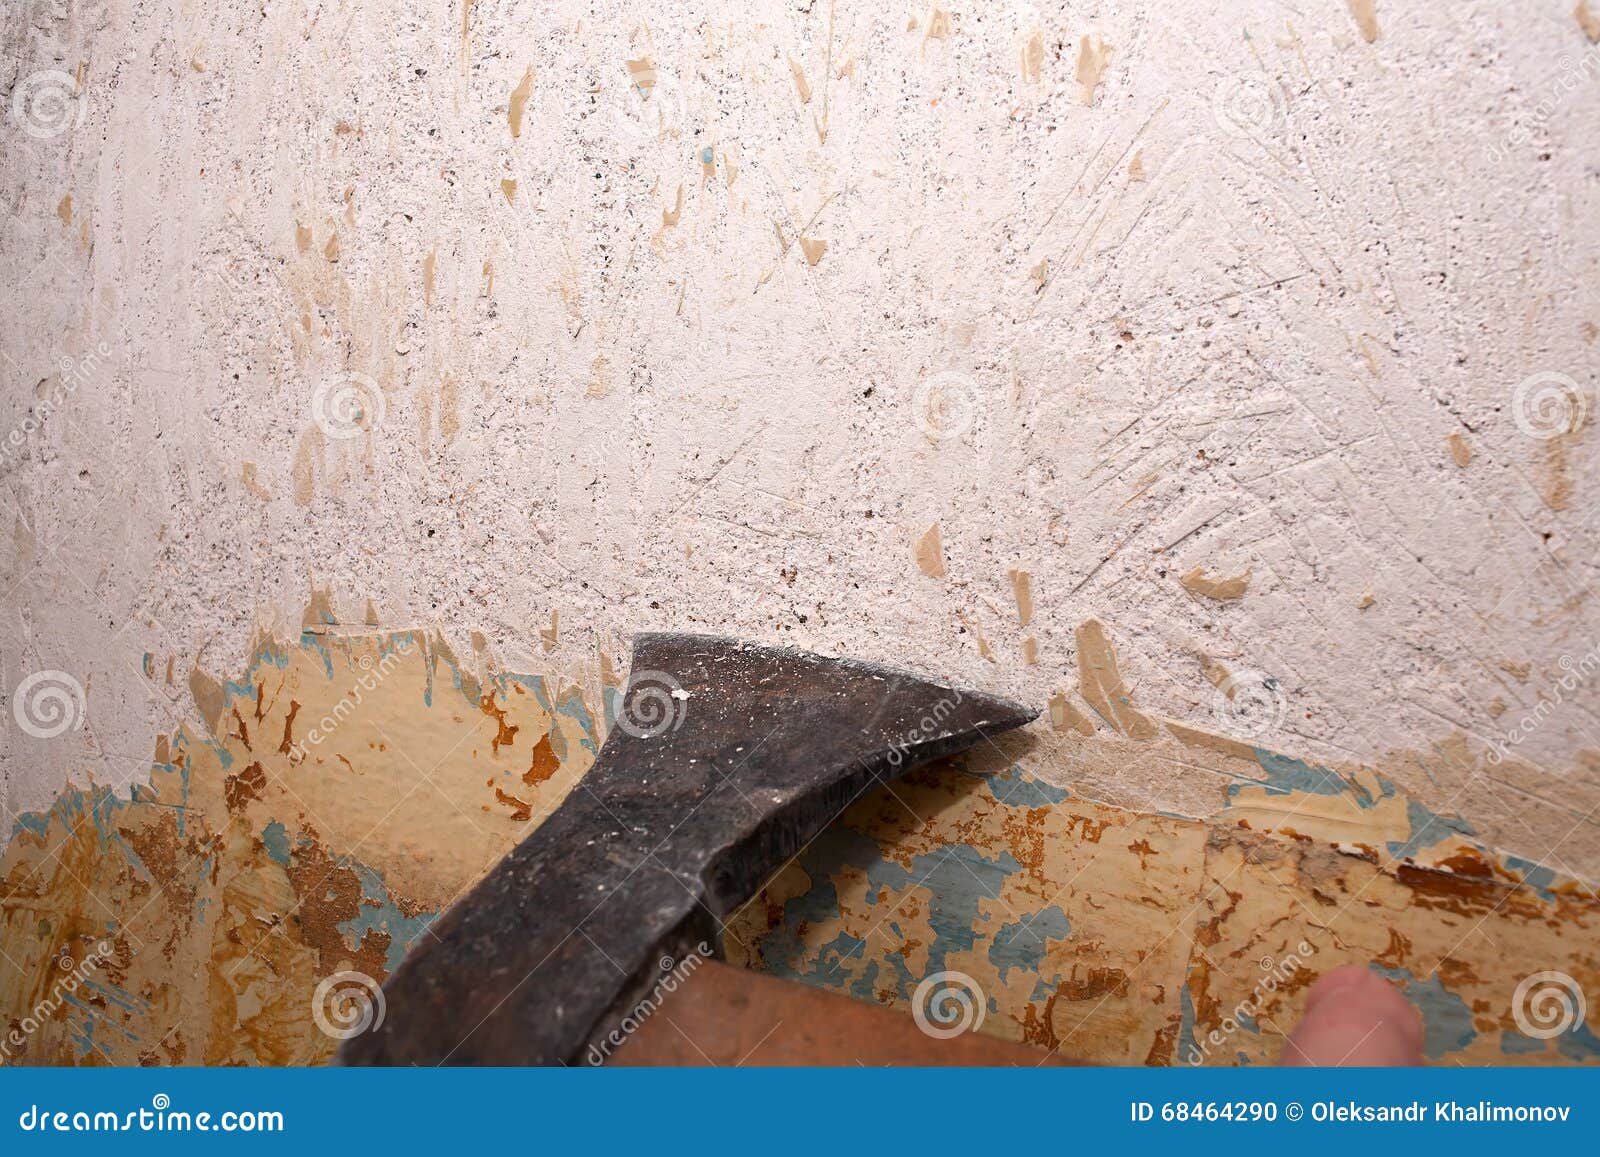 Removing The Old Paint From The Wall Stock Photo Image Of Removal